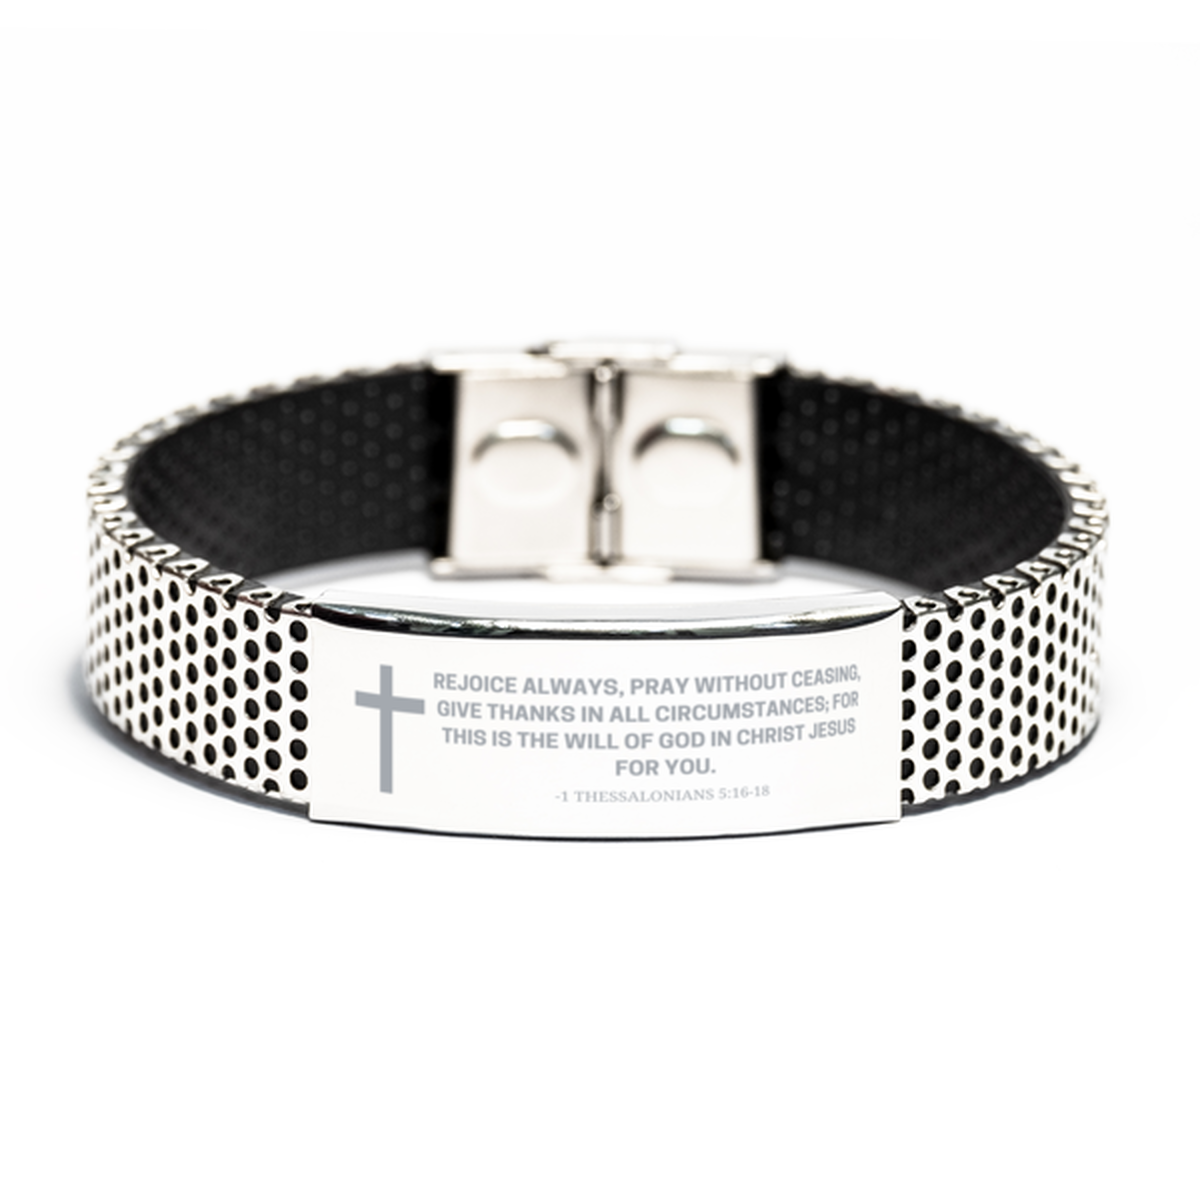 Baptism Gifts For Teenage Boys Girls, Christian Bible Verse Stainless Steel Bracelet, Rejoice always, pray without ceasing, Catholic Confirmation Gifts for Son, Godson, Grandson, Nephew